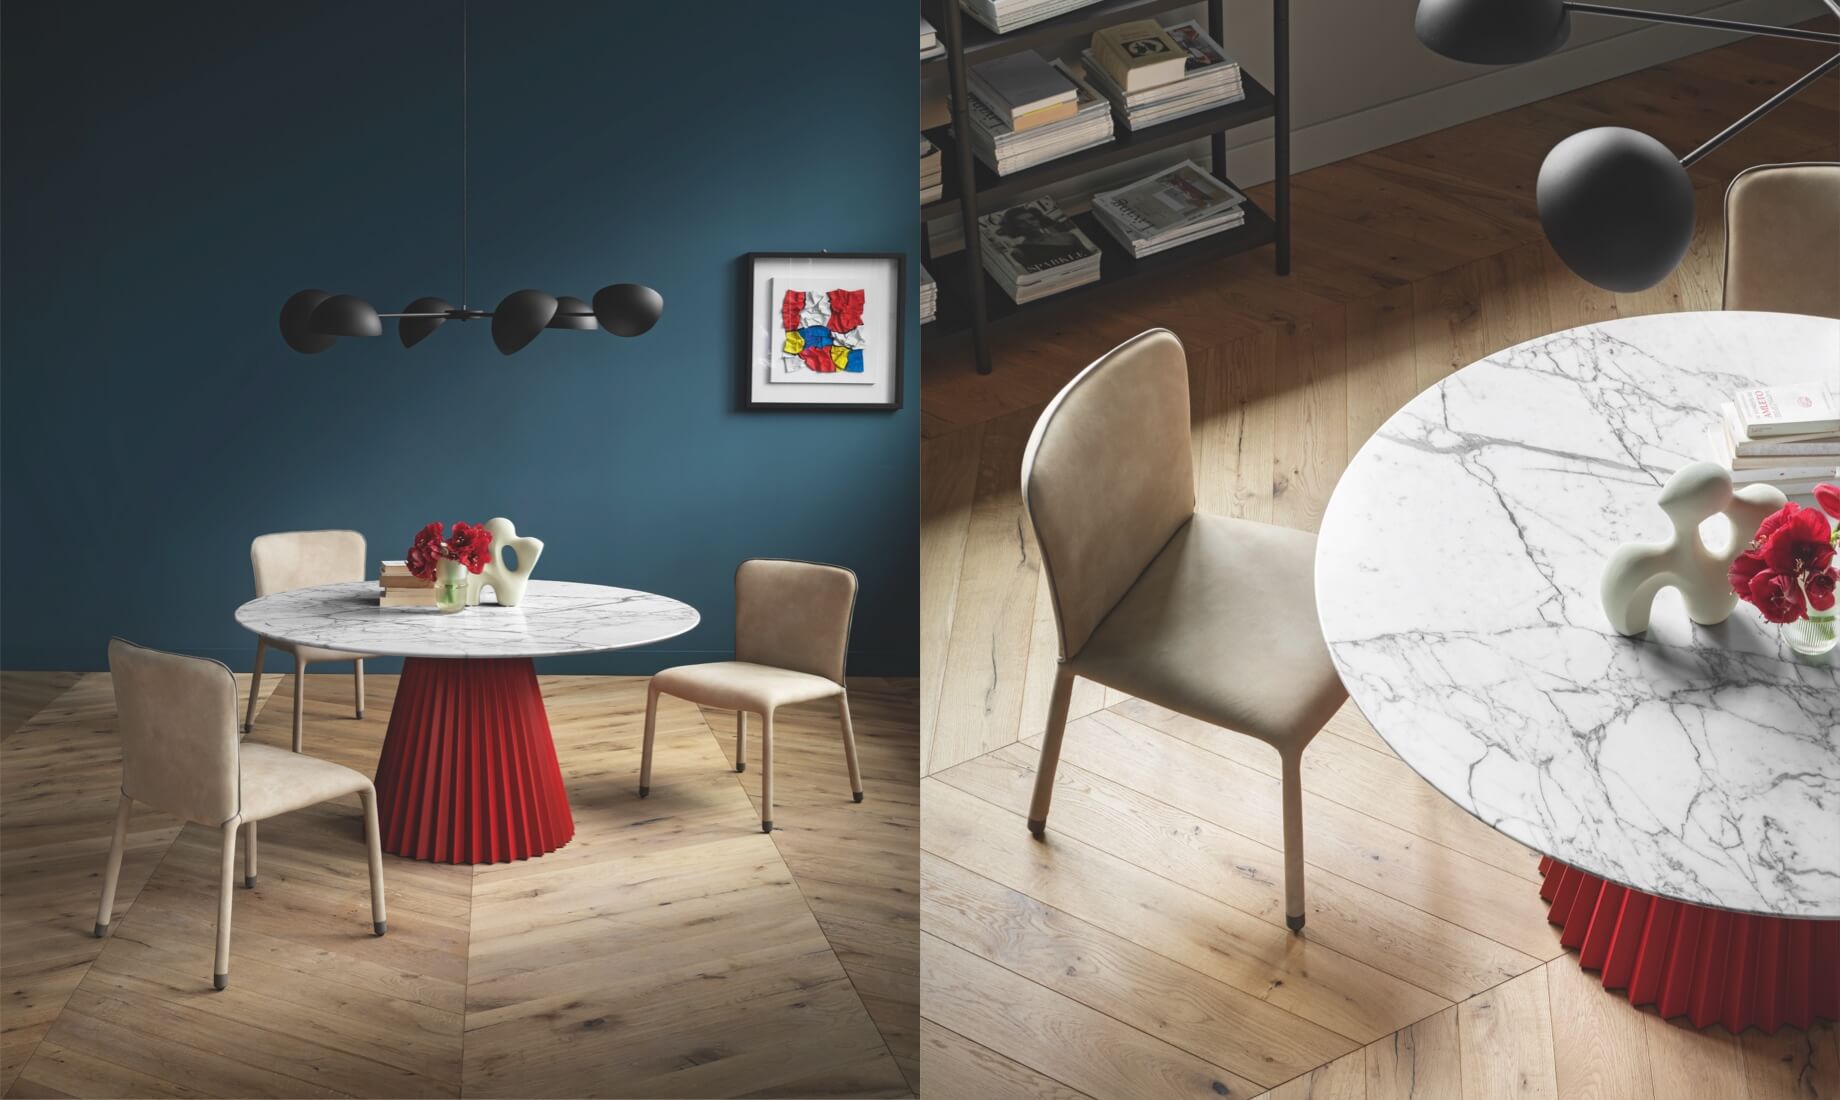 S1 chair and Plissé table, design Paola Navone.